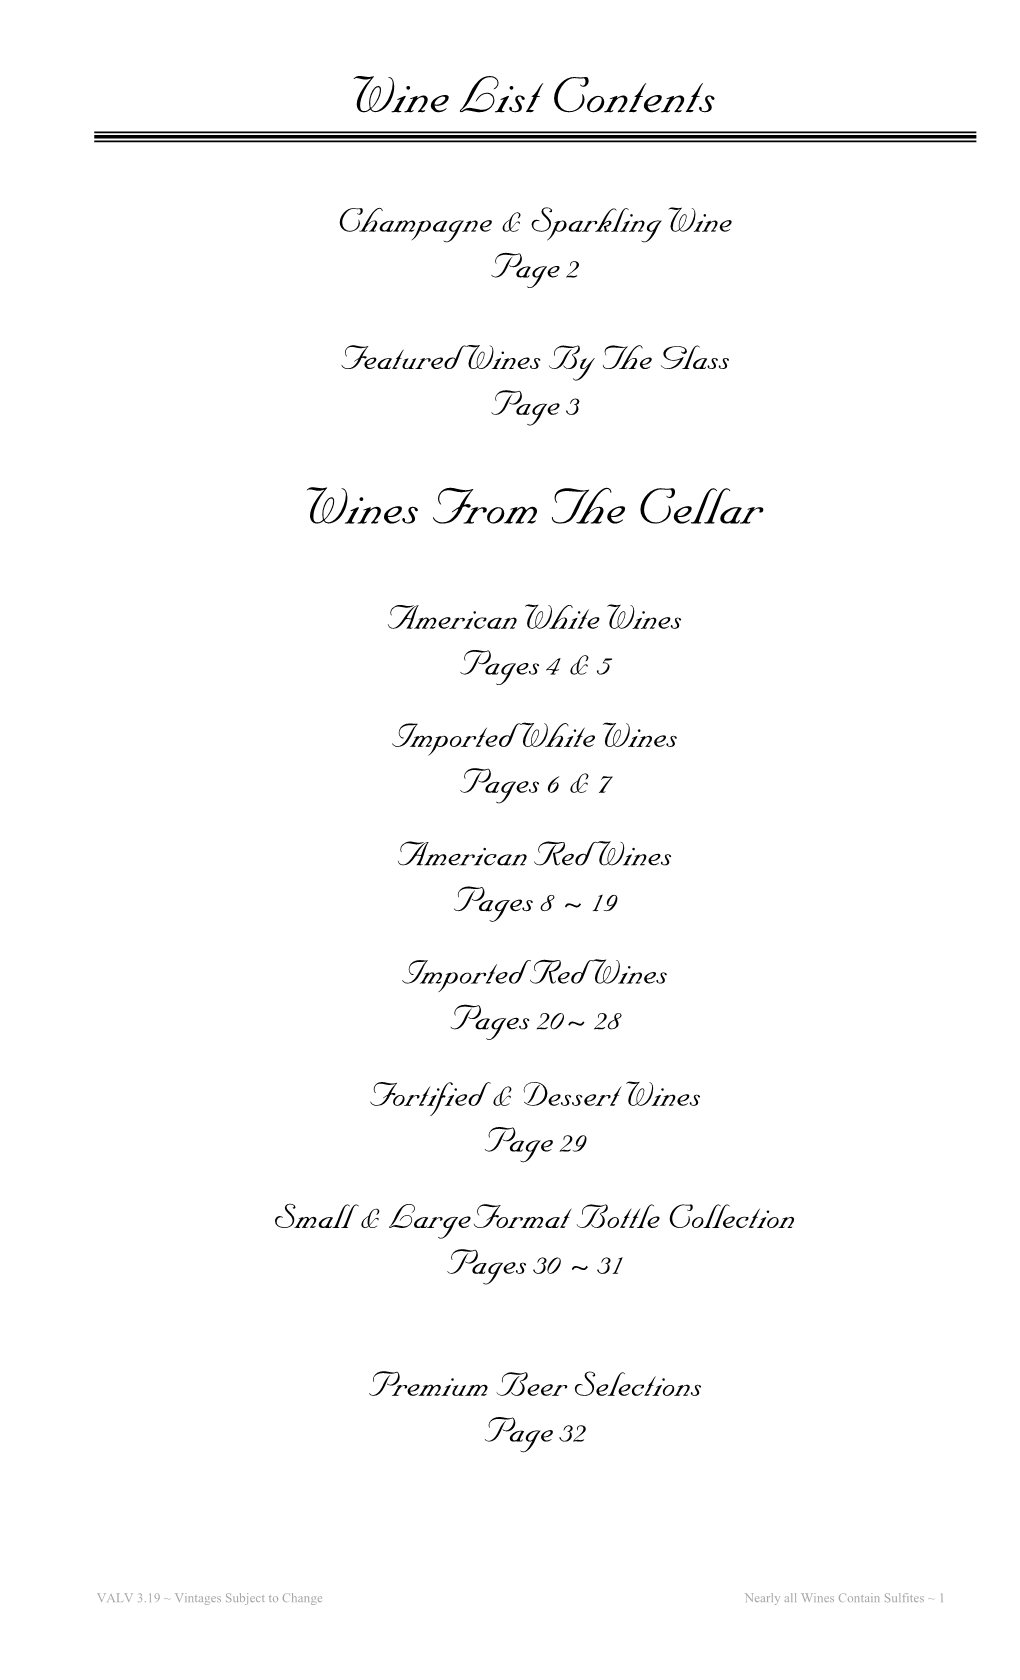 Wine List Contents Wines from the Cellar